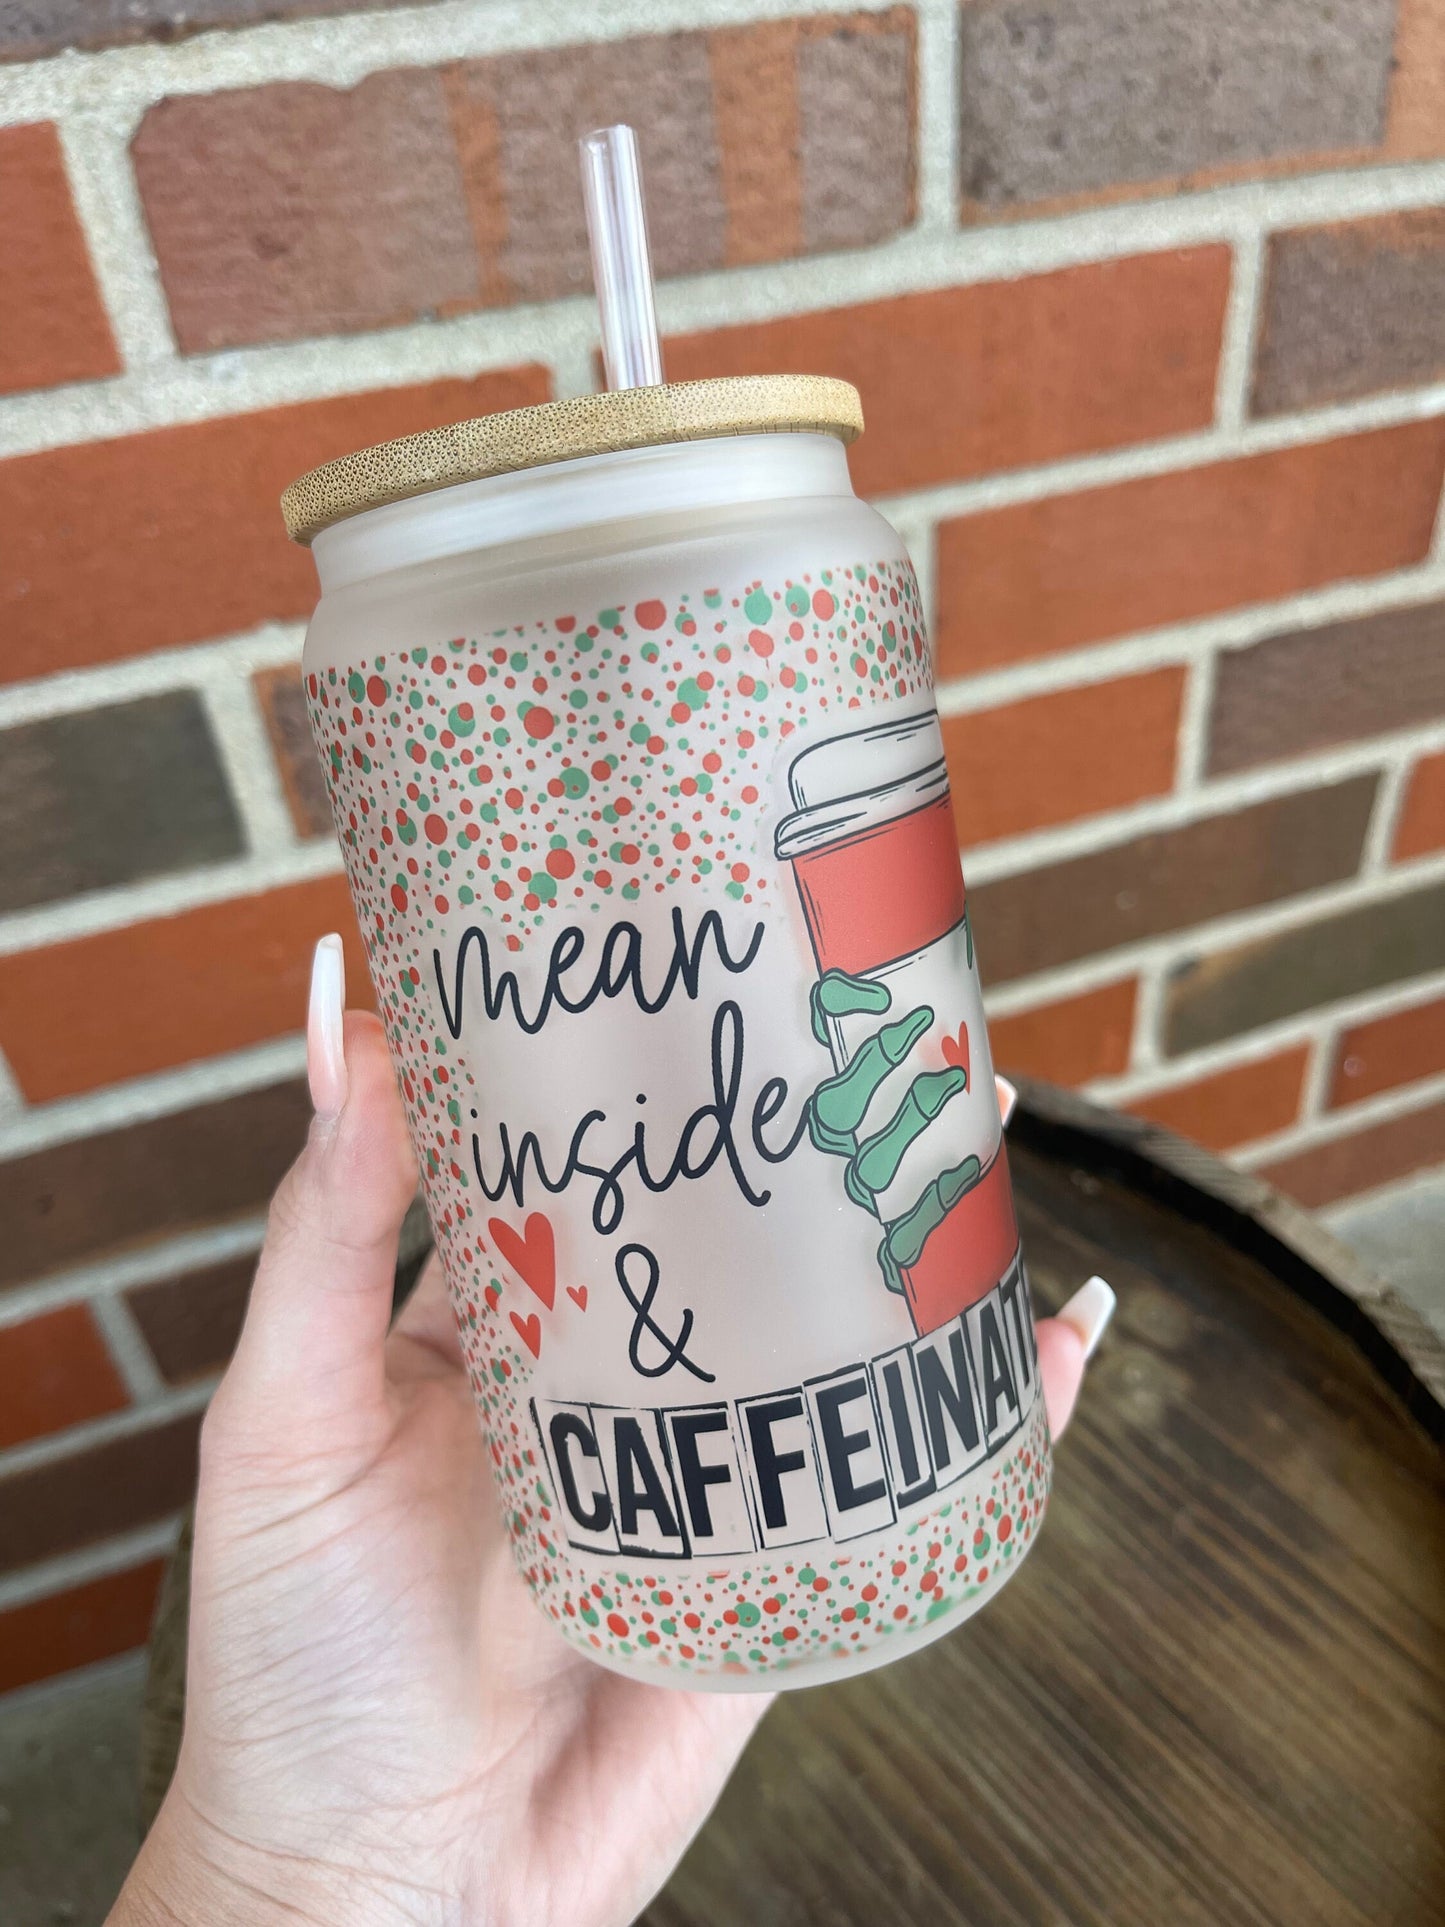 Mean Inside And Caffeinated 16 Oz Frosted Glass Tumbler, Skeleton, Christmas Tumbler, Frosted Glass Coffee Tumbler, Xmas Tumbler, X-mas